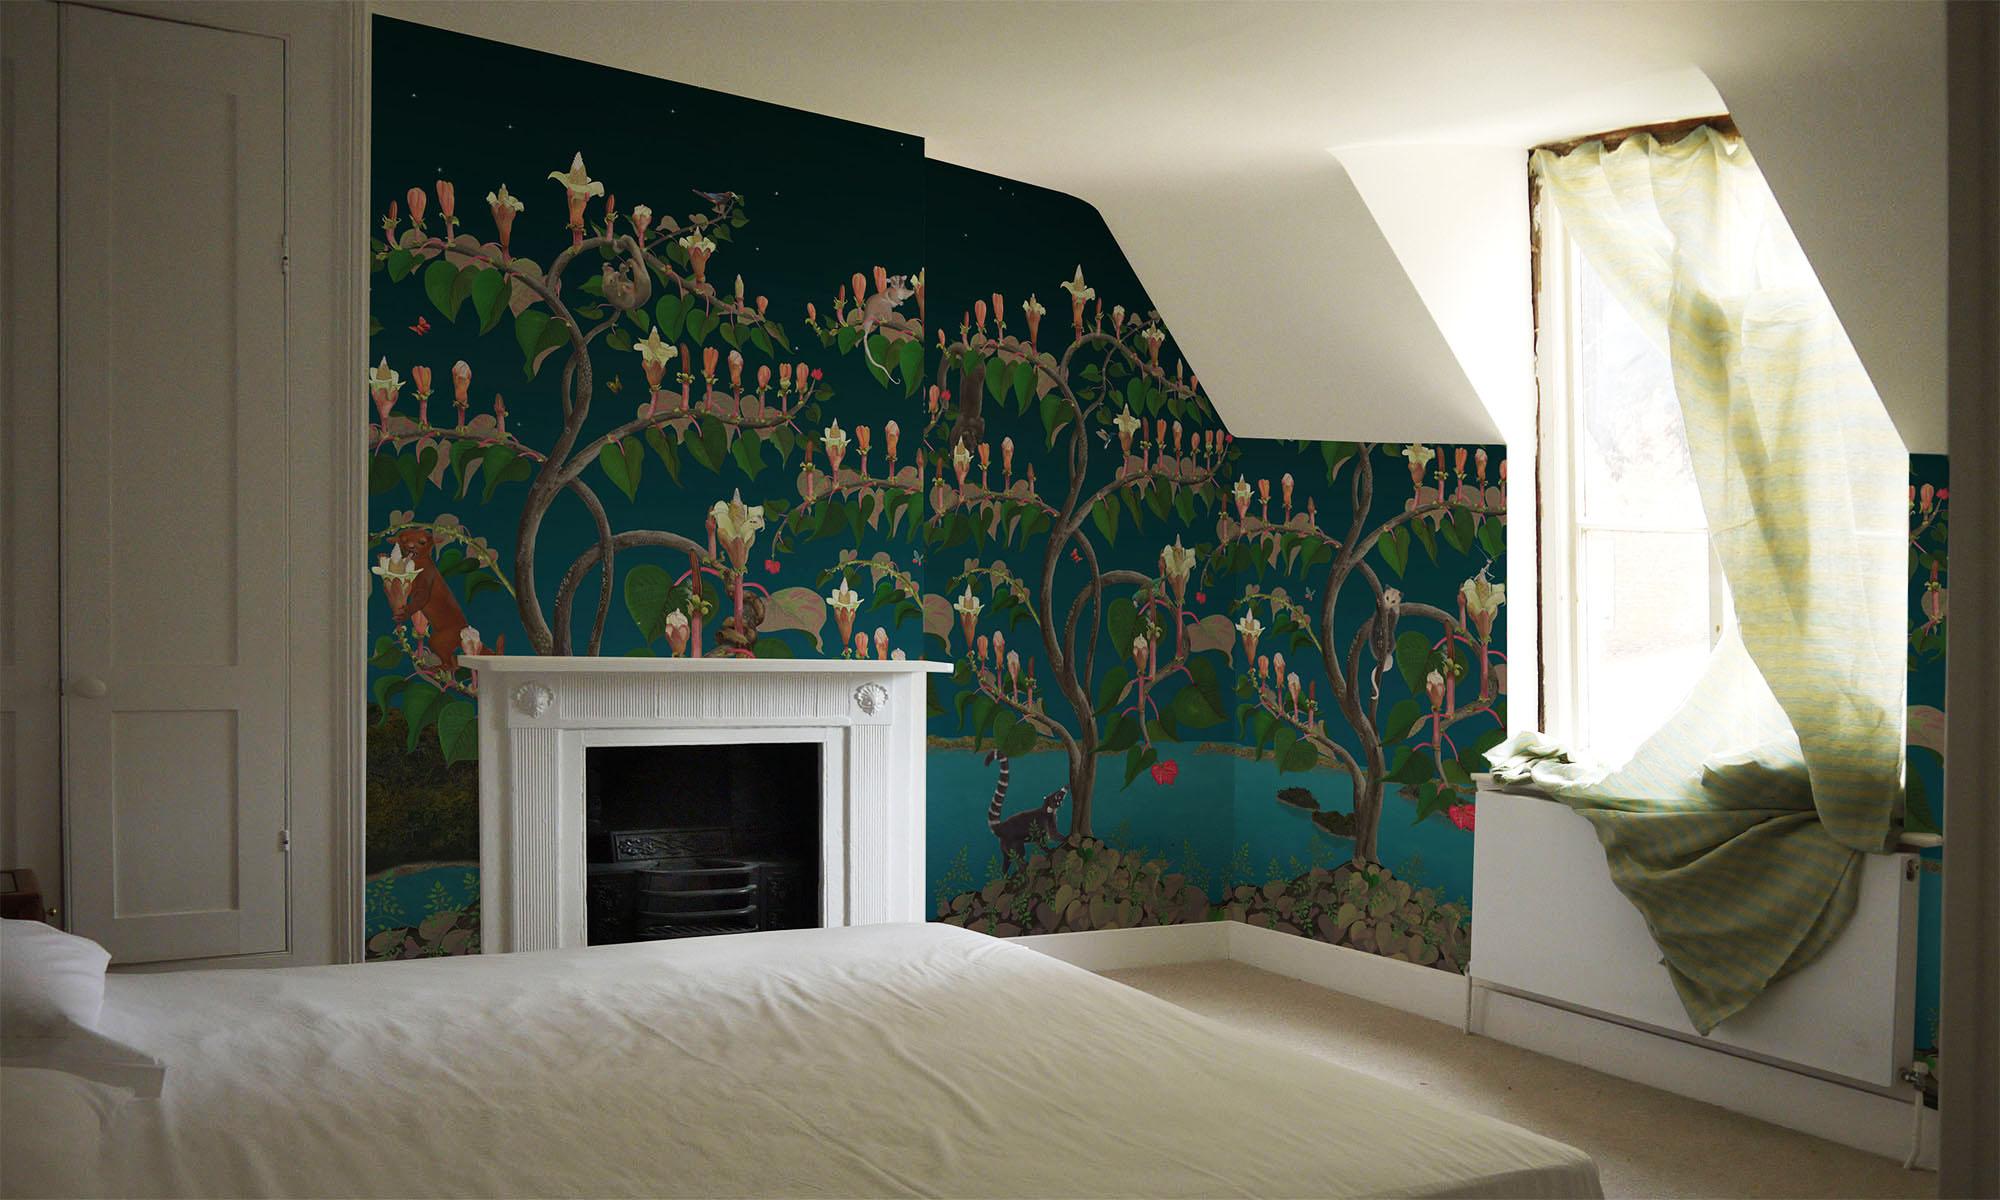 Collection: Ochroma Wild Things
Scale: Large
Product code: 45
Colourway: Pre-Dawn Blue
Wallpaper: The designs are printed on Uncoated Non-woven 147gsm.
Roll dimensions:137cm x 12m
Area: 16.44m2

These designs are made up of 4 panels: A, B, C and D.